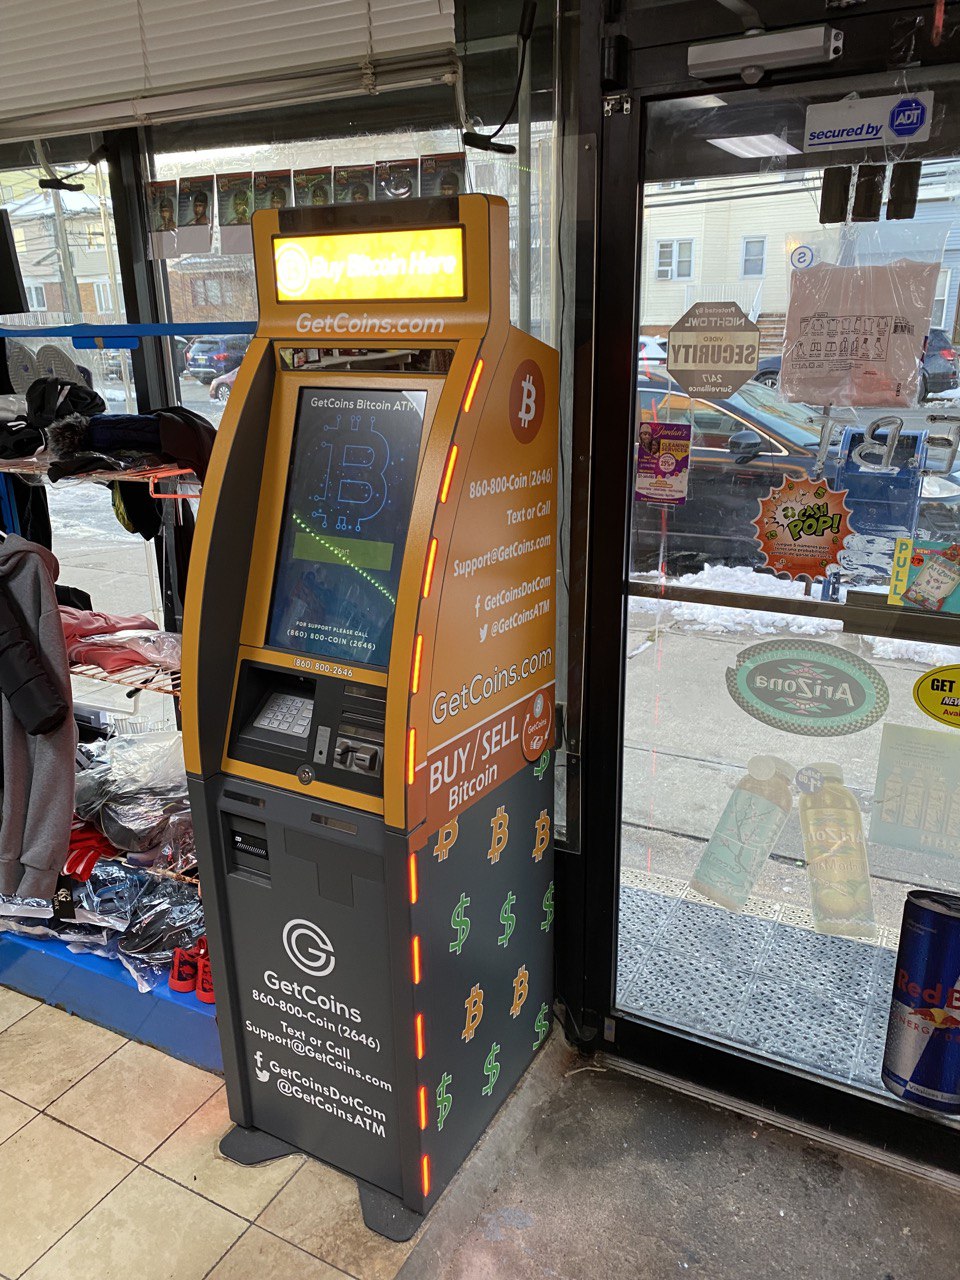 Getcoins - Bitcoin ATM - Inside of Edward Inc. Deli in Bayonne, New Jersey